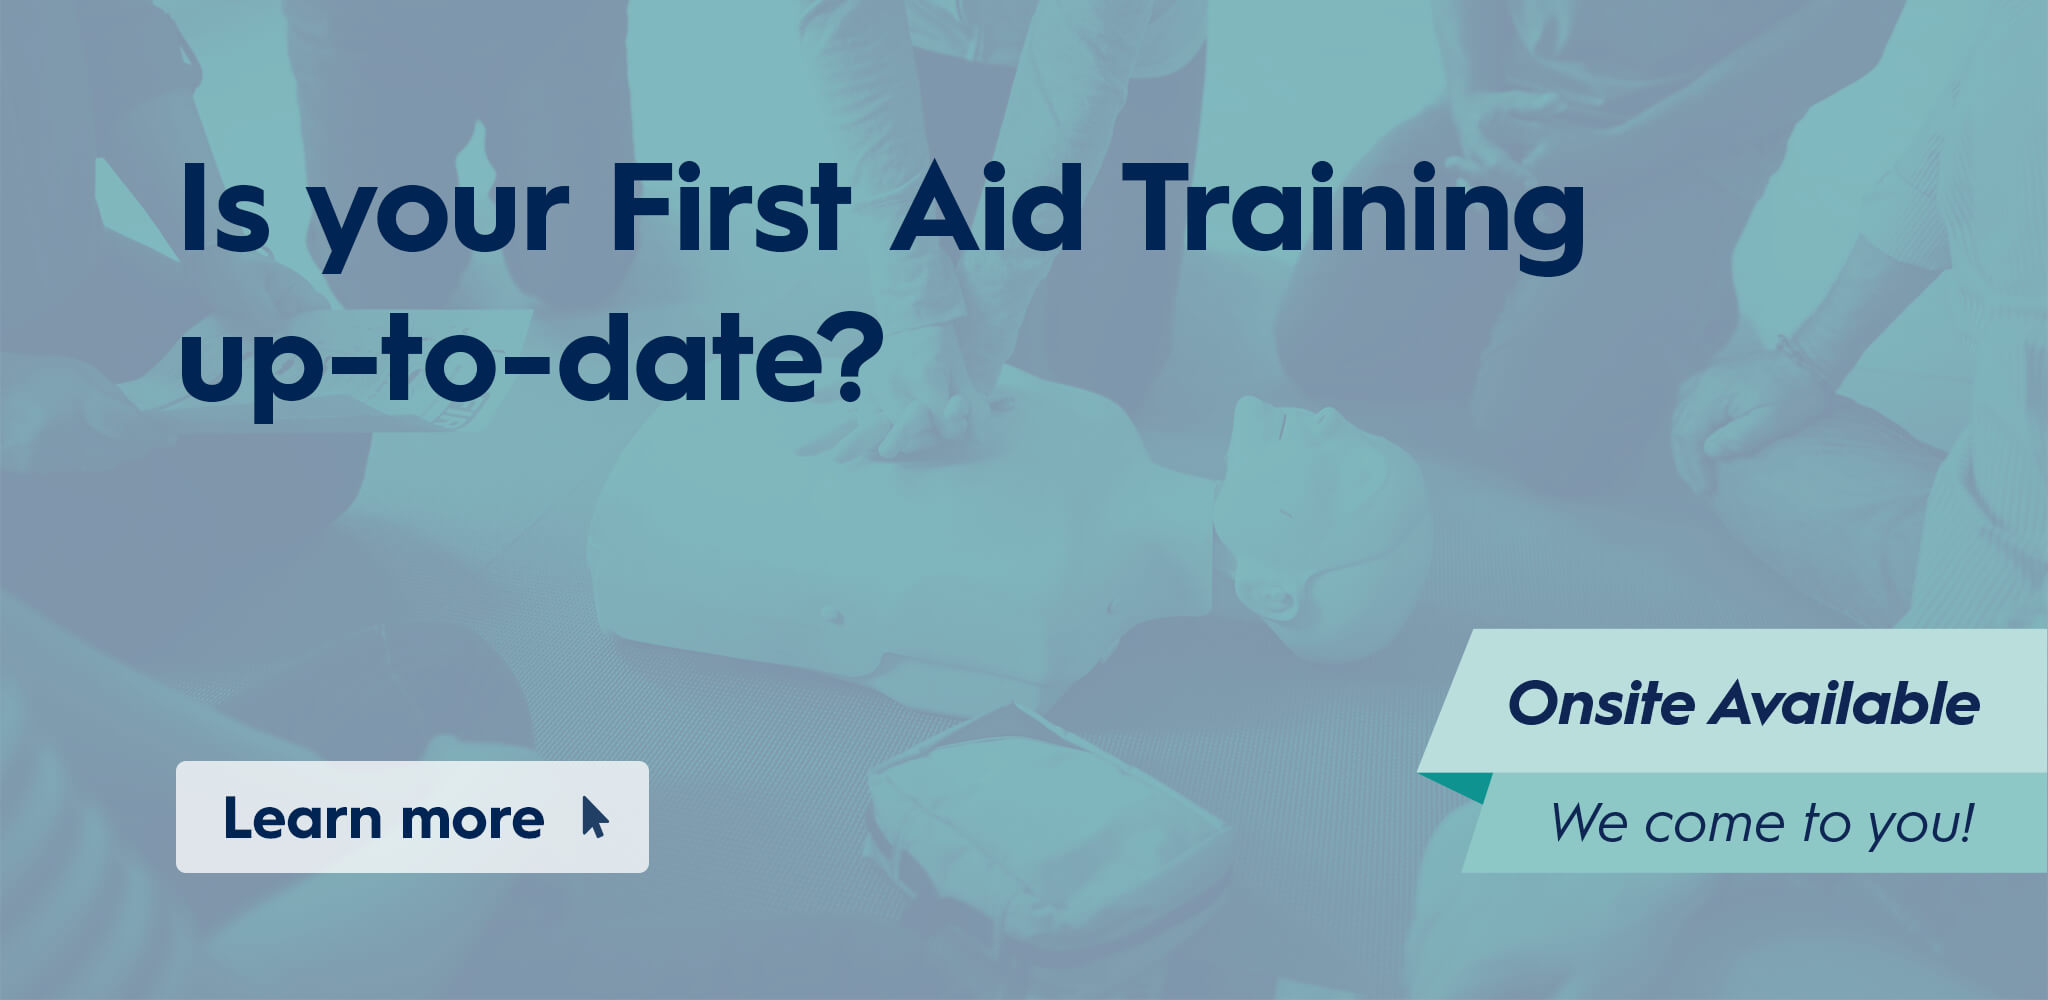 Is your first aid training up-to-date? banner